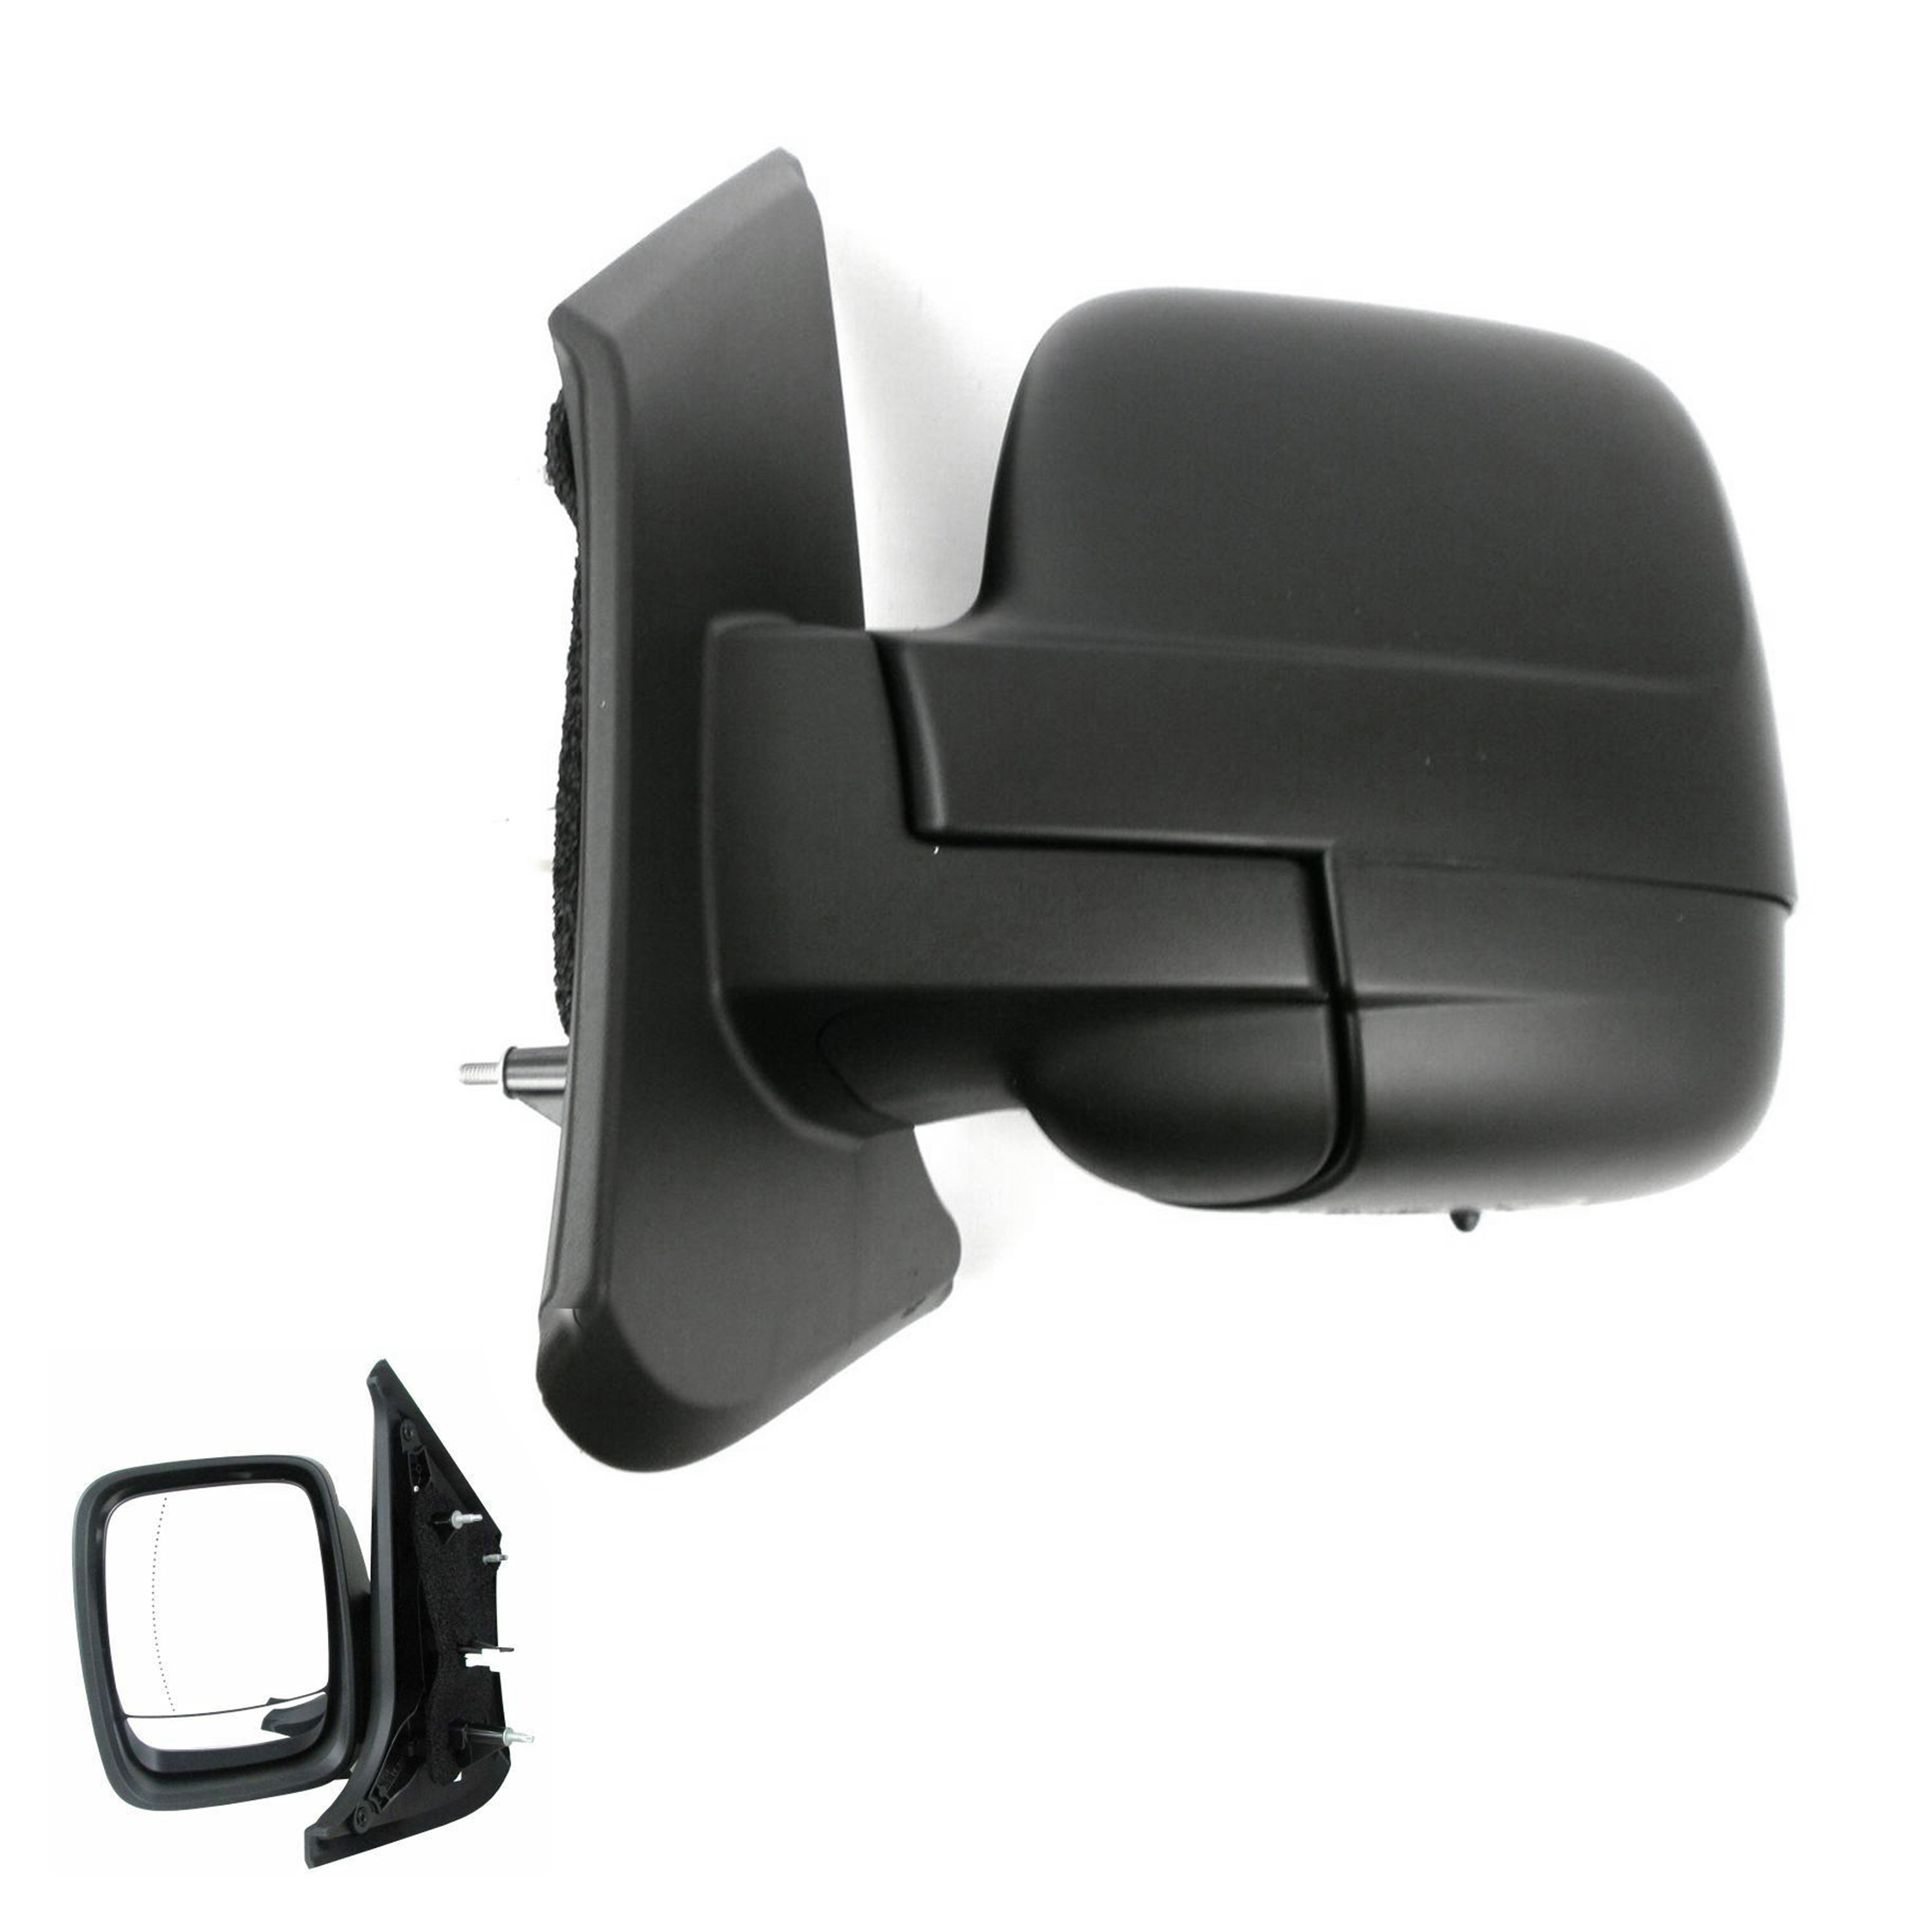 Renault Trafic Complete Wing Mirror Unit LEFT HAND ( UK Passenger Side ) 2014 to 2019 – Electric Wing Mirror Unit